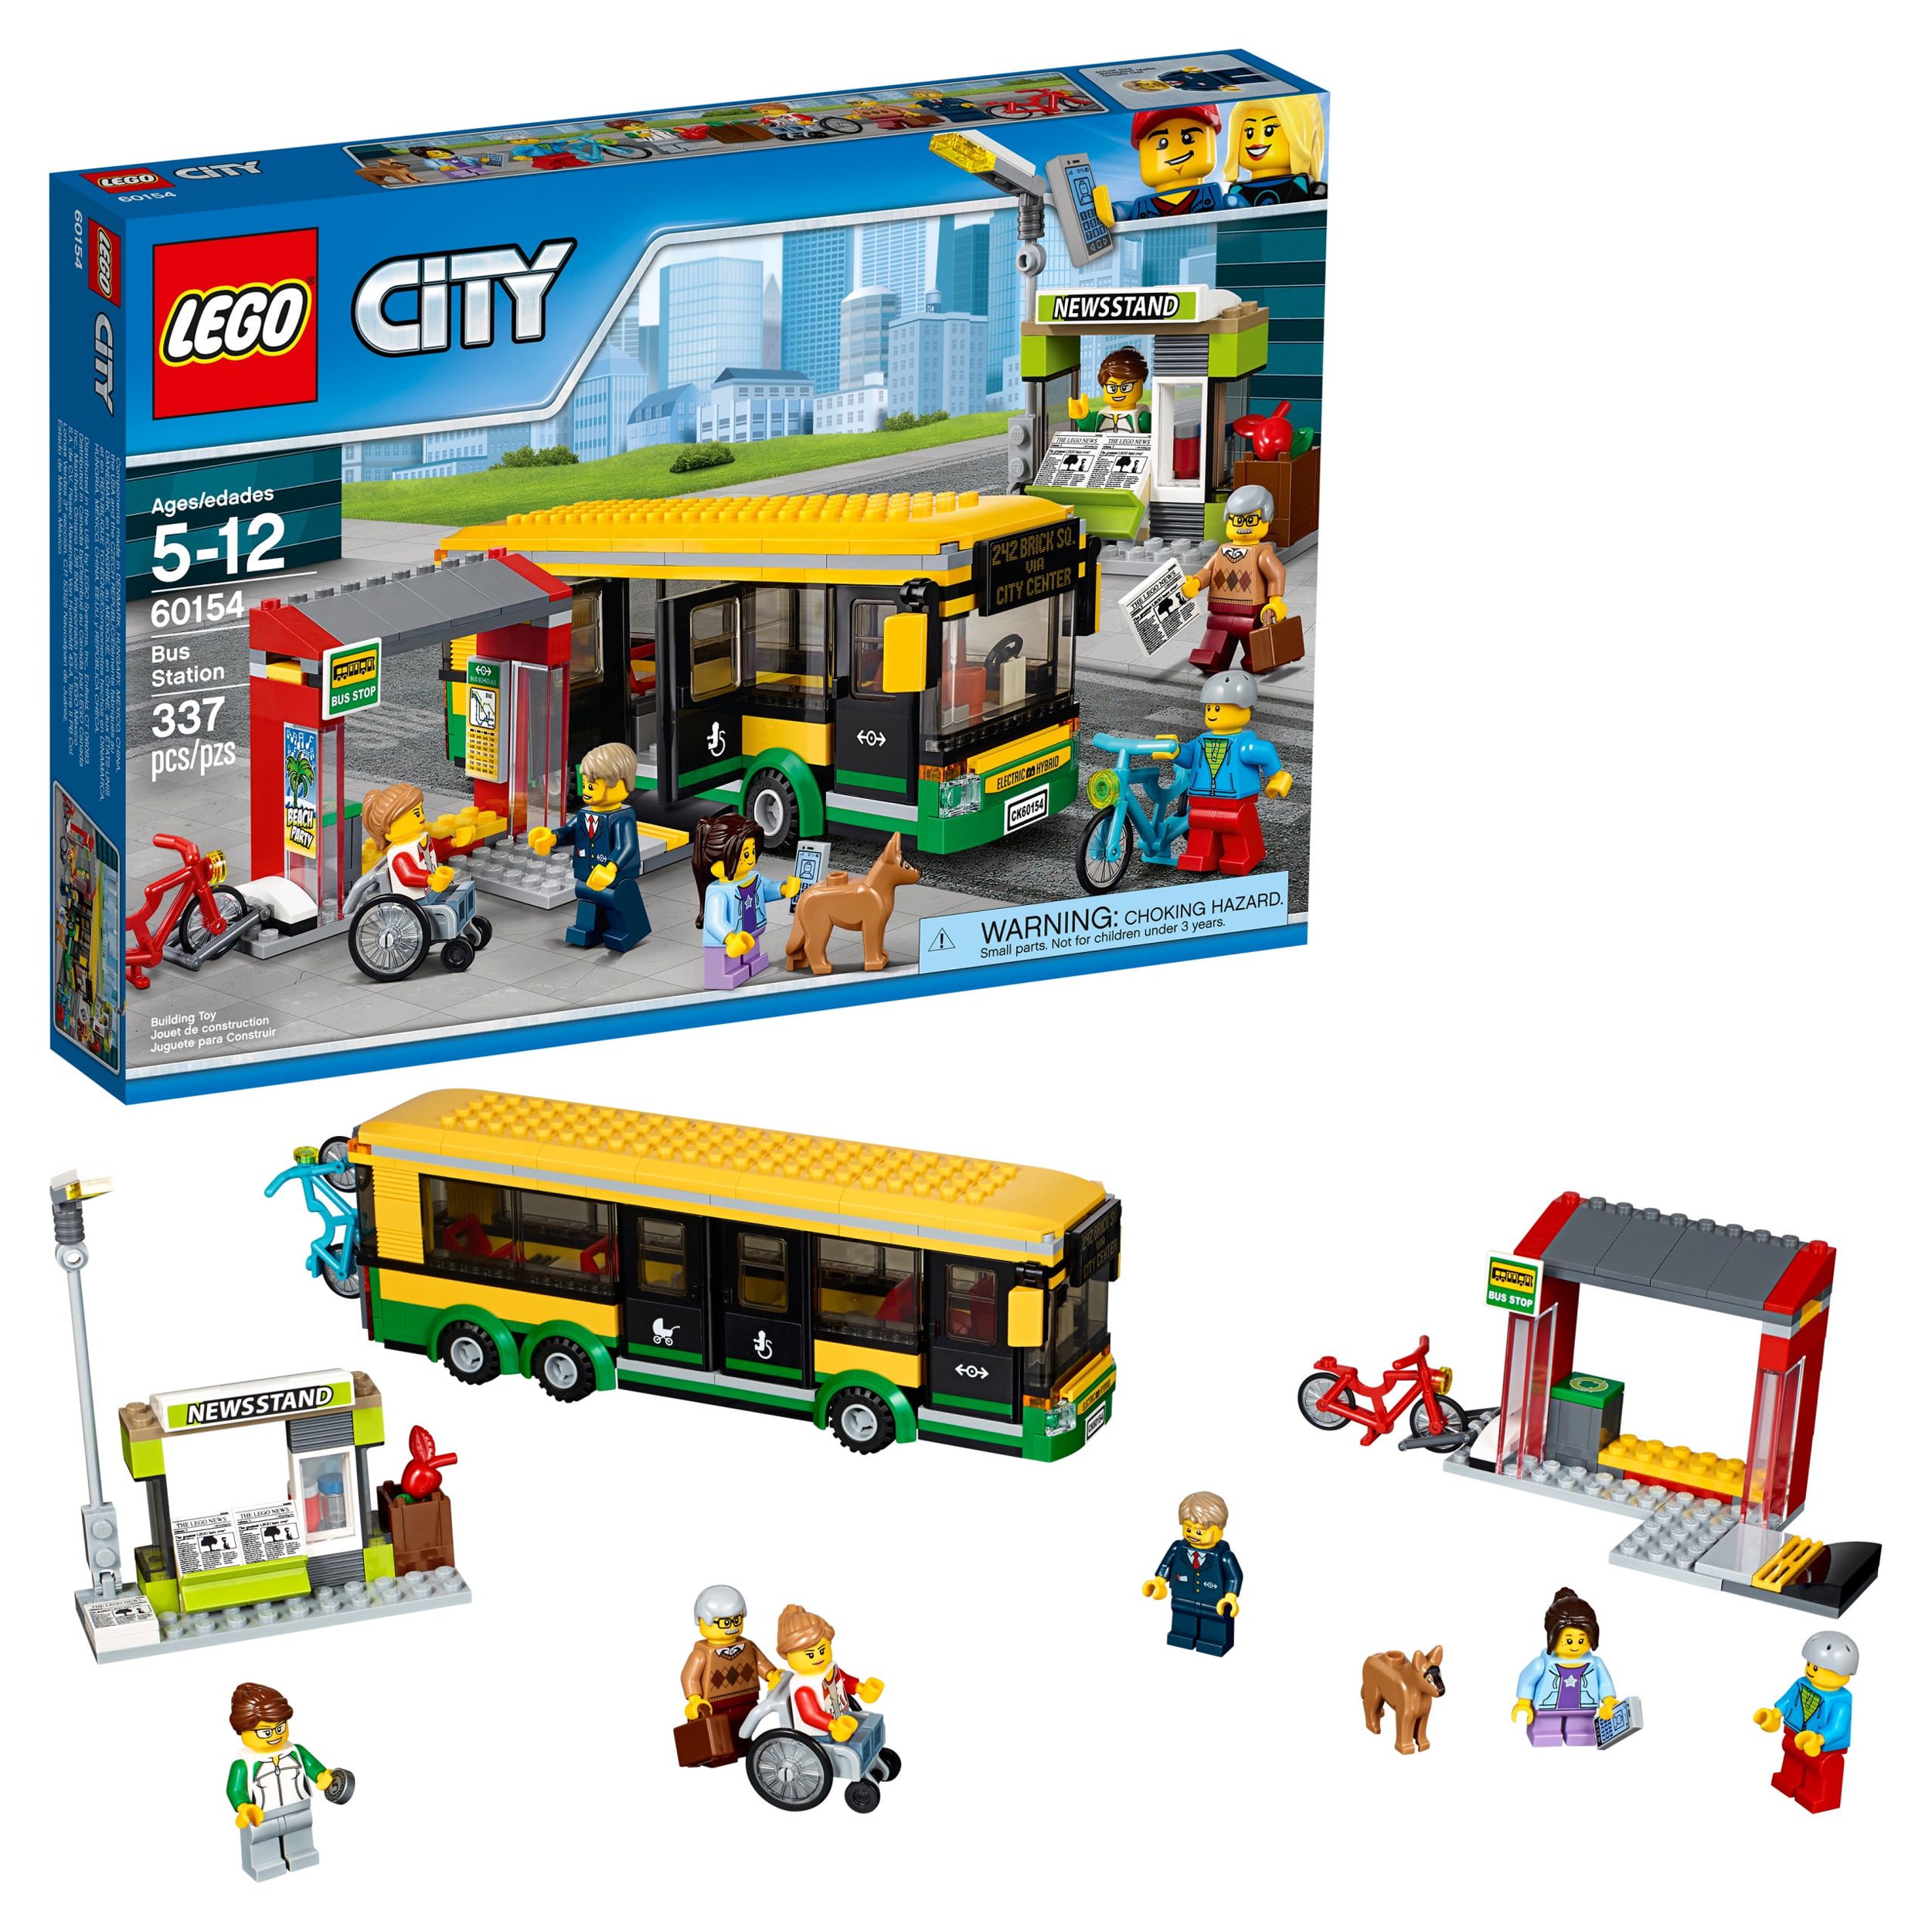 LEGO City Town Bus Station 60154 Building Set (337 Pieces) - image 1 of 8